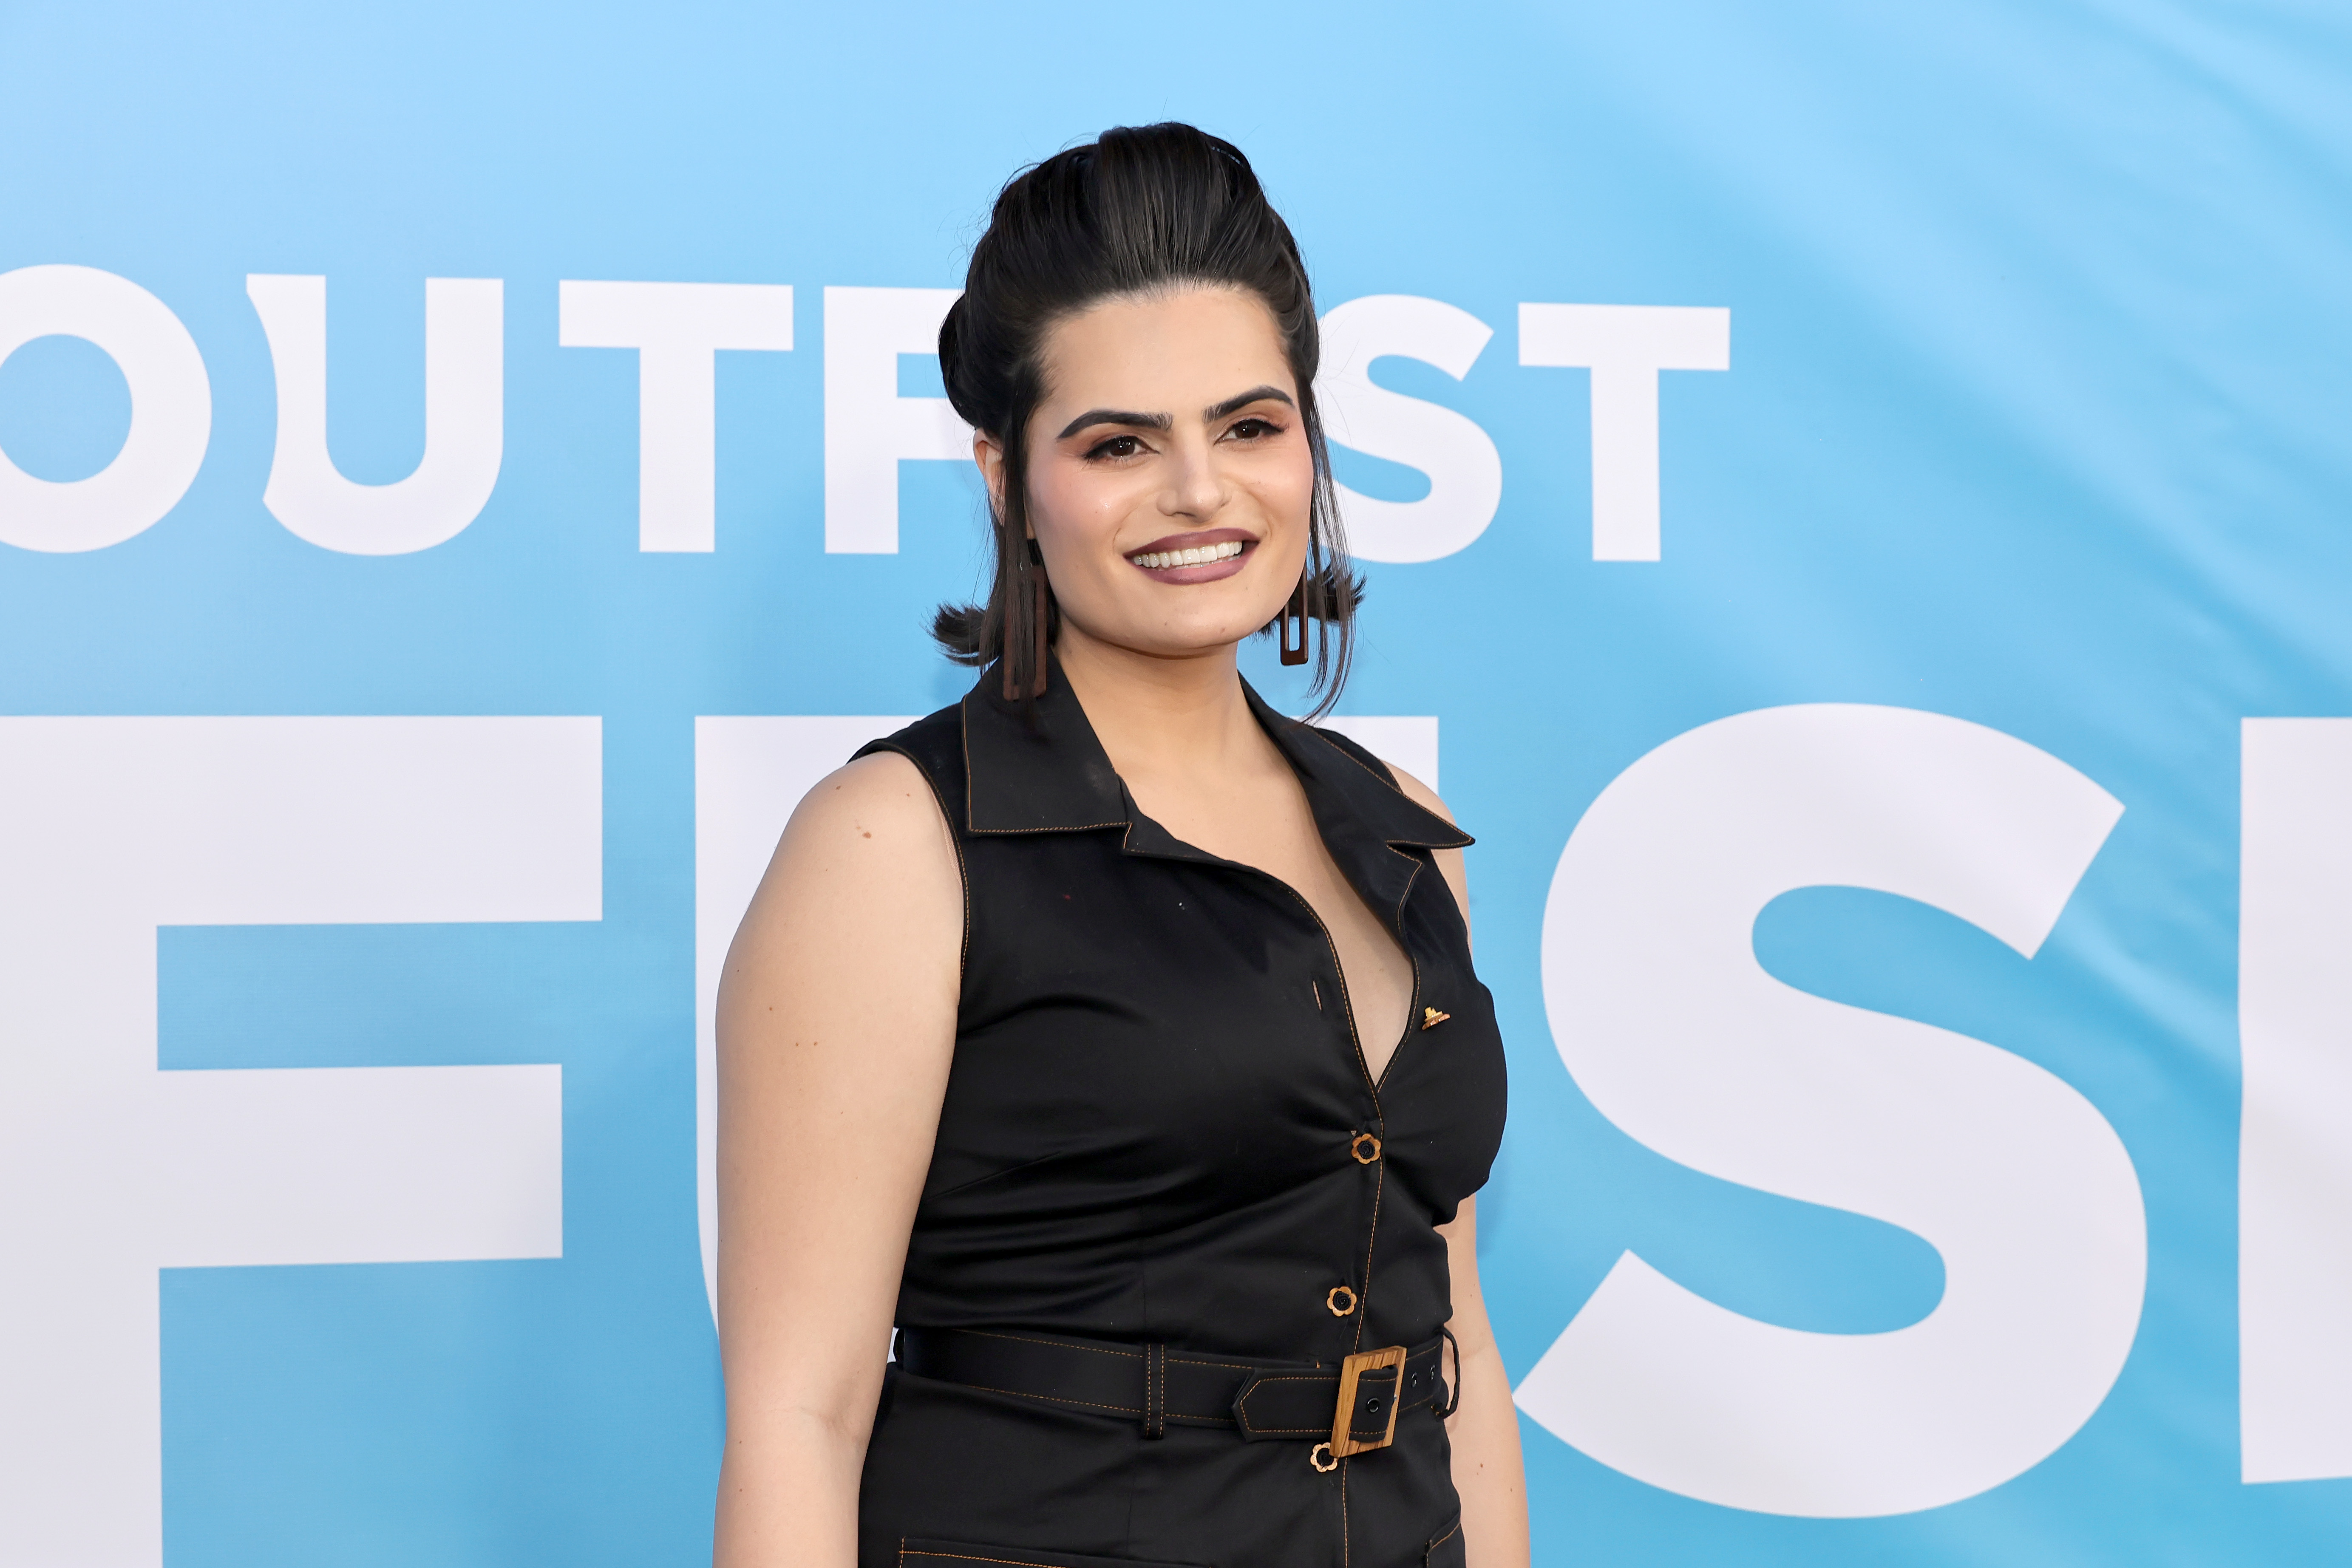 Nava Mau attends the Outfest Fusion Opening Gala during the 19th Annual Outfest Fusion QTBIPOC Film Festival at Japanese American Cultural & Community Center on April 8, 2022 in Los Angeles, California.